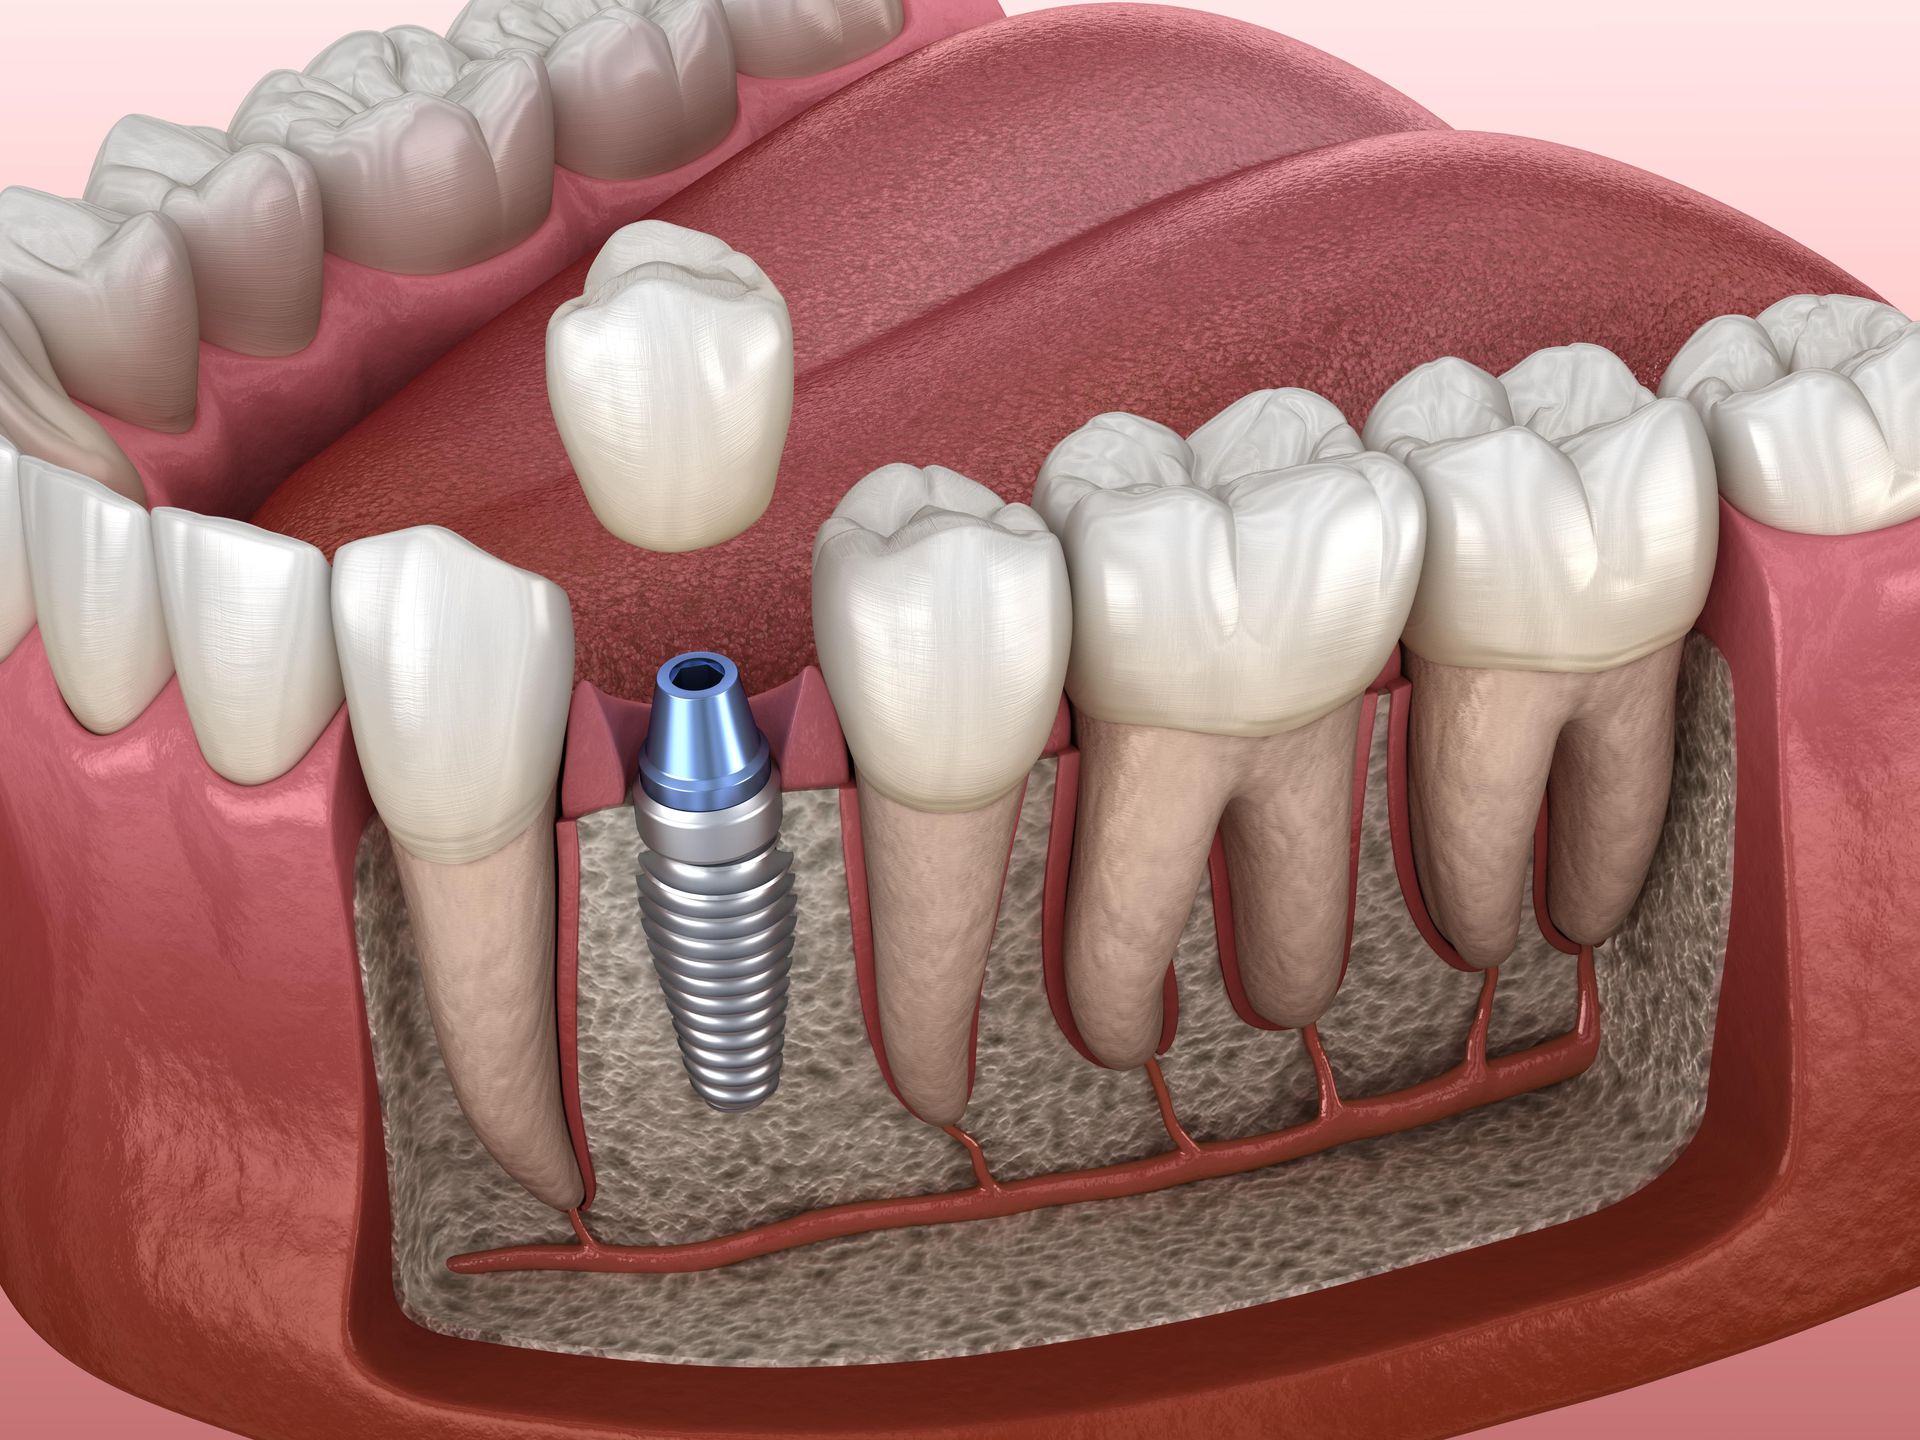 A computer generated image of the inside of the gum showing the dental implant